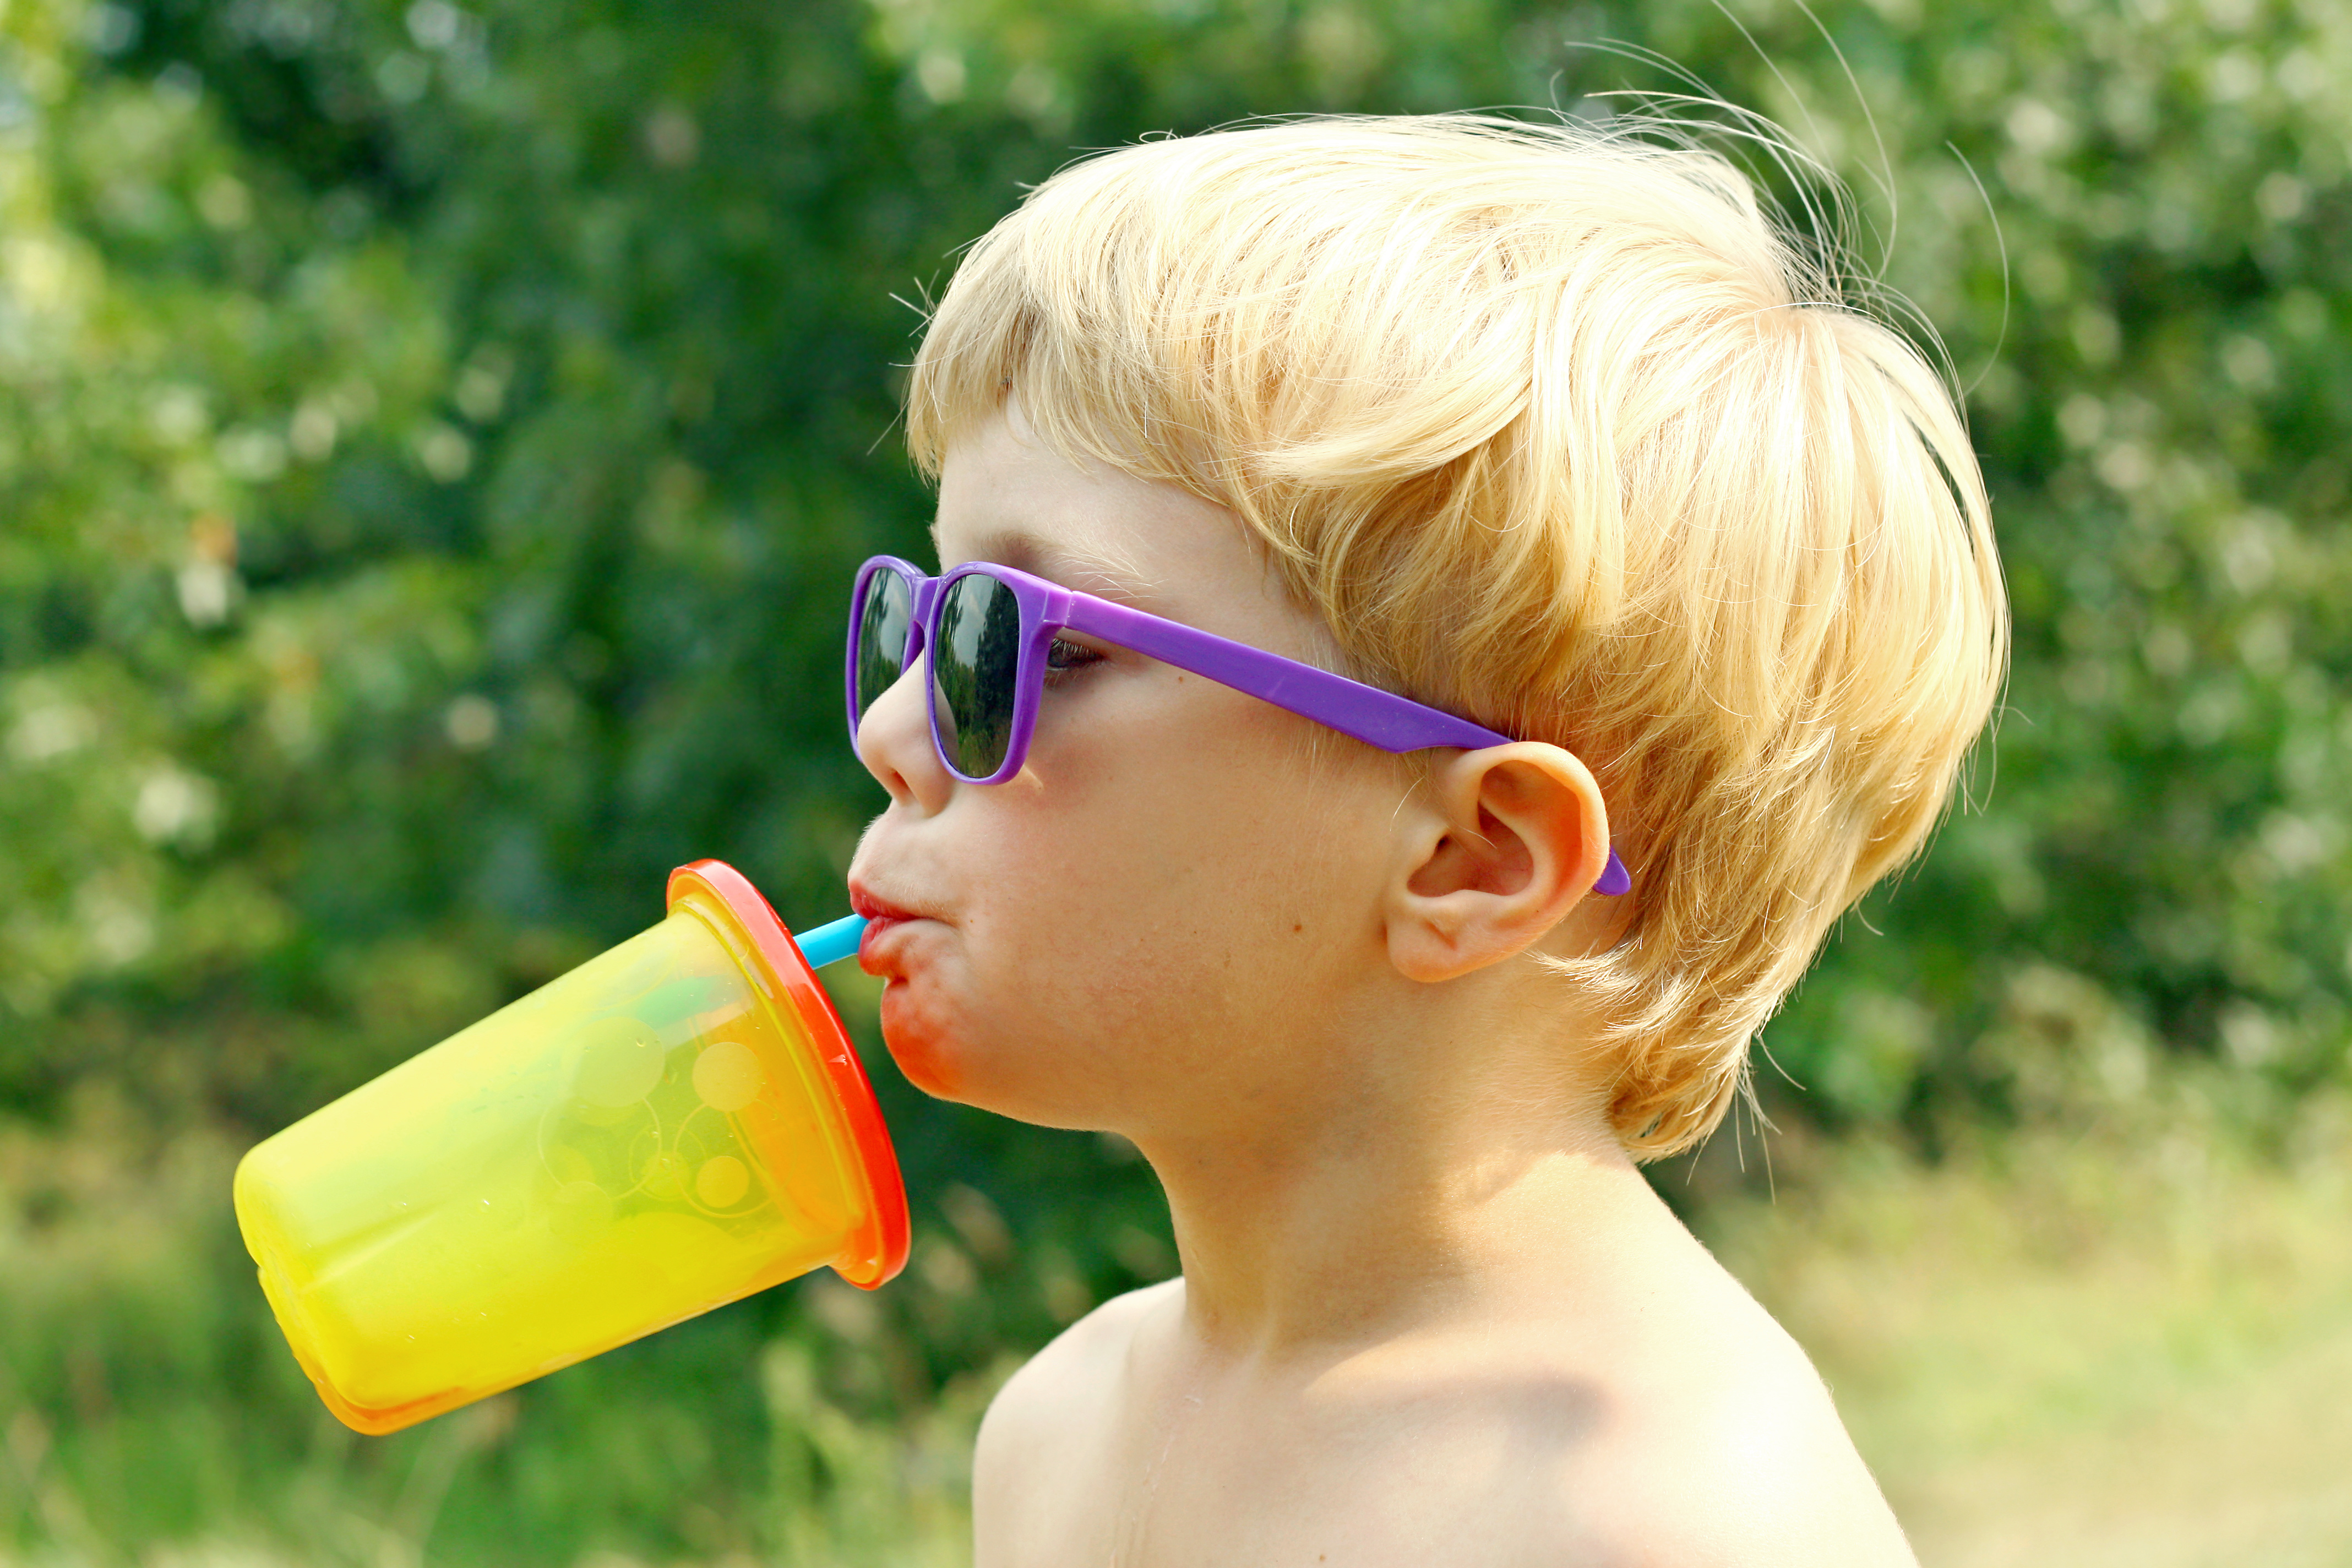 https://www.childsplaytherapycenter.com/wp-content/uploads/2016/07/boy-with-straw-and-cup.jpg